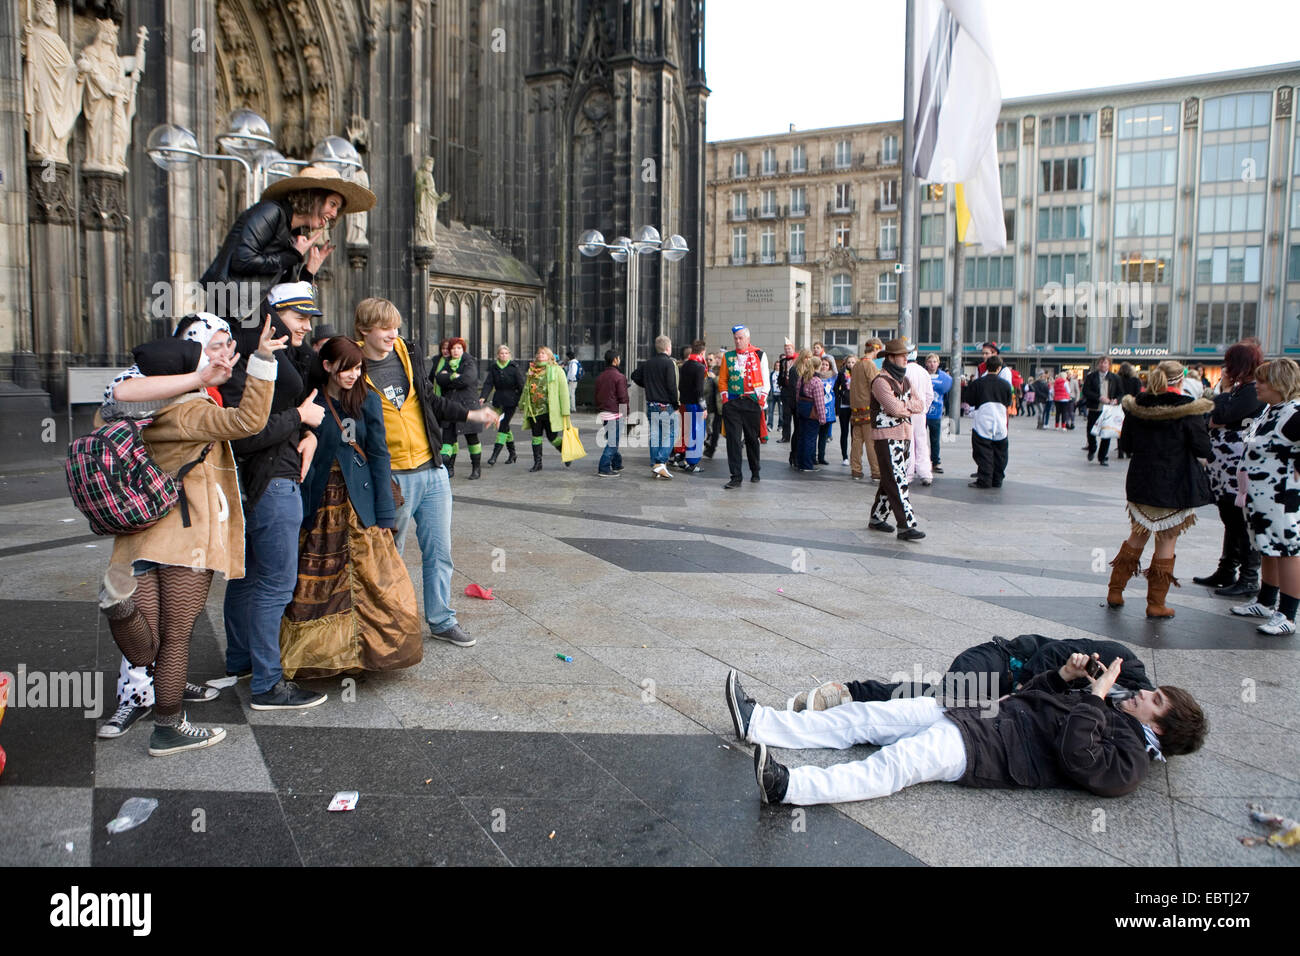 masked people in front of the Cologne Cathedral celebrating the start of the carnival season on Novemer 11, Germany, North Rhine-Westphalia, Cologne Stock Photo